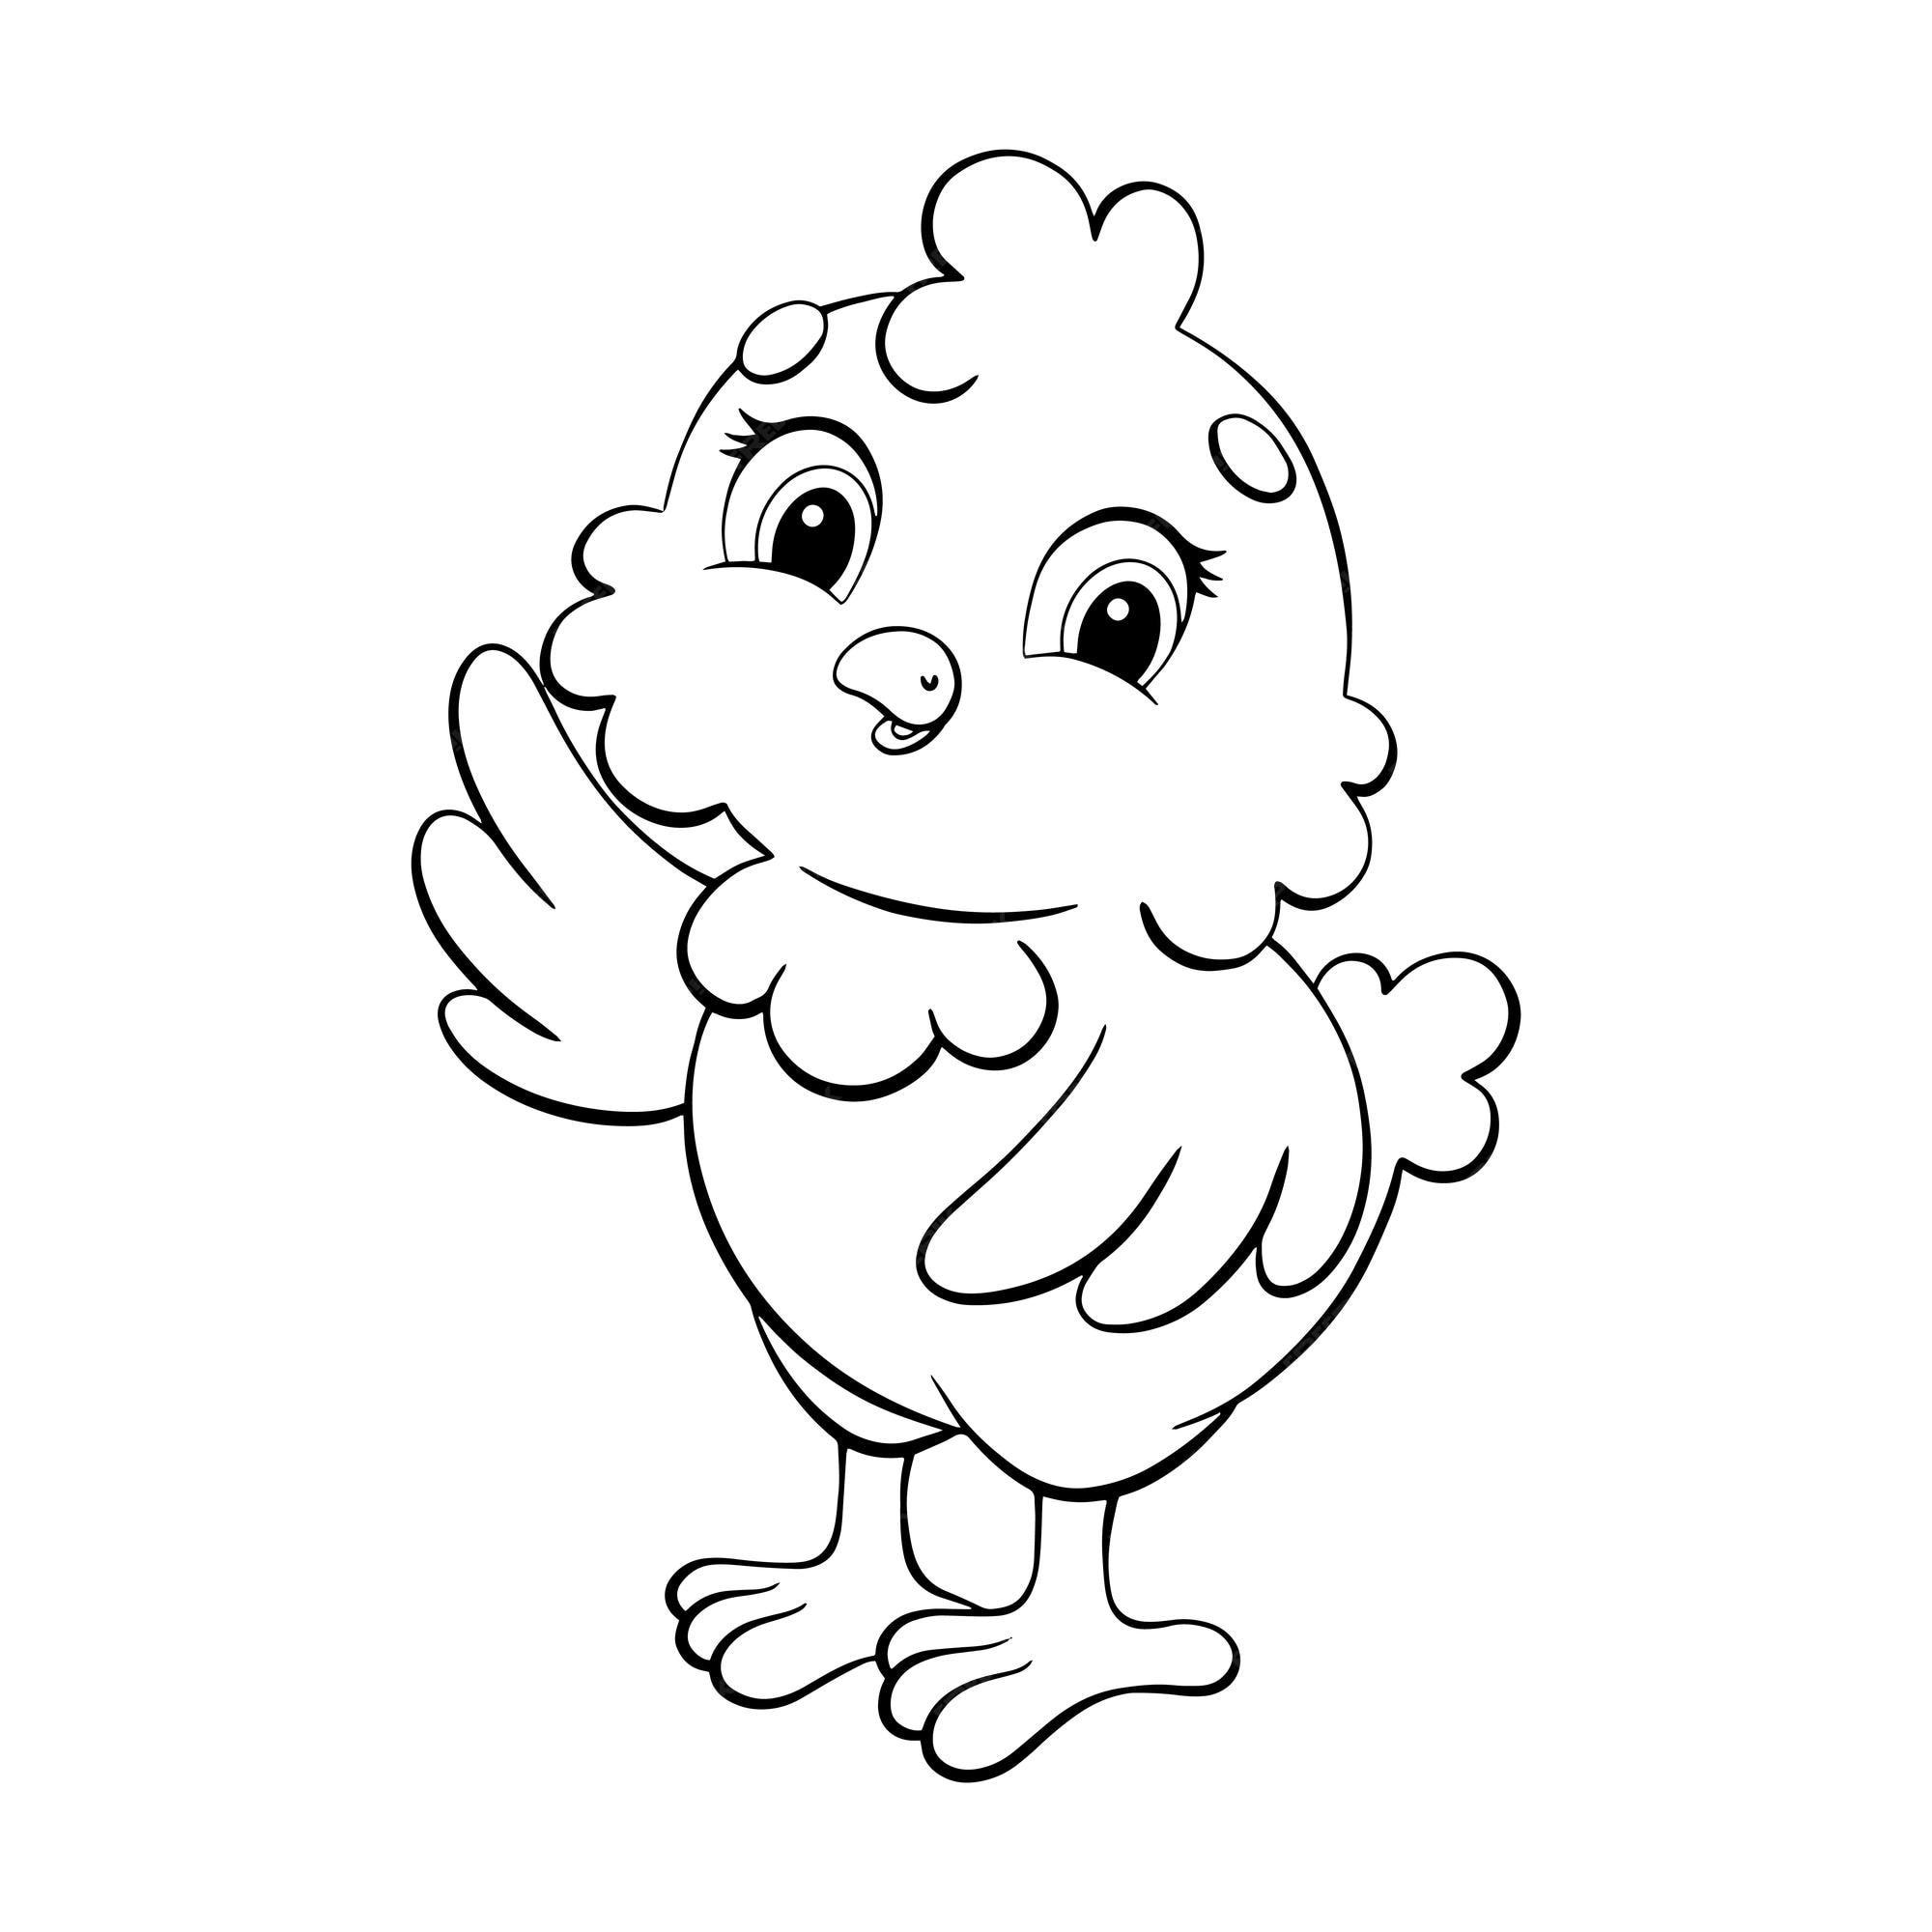 Premium vector cute chicken coloring page for kids digital stamp cartoon style character vector illustration isolated on white background